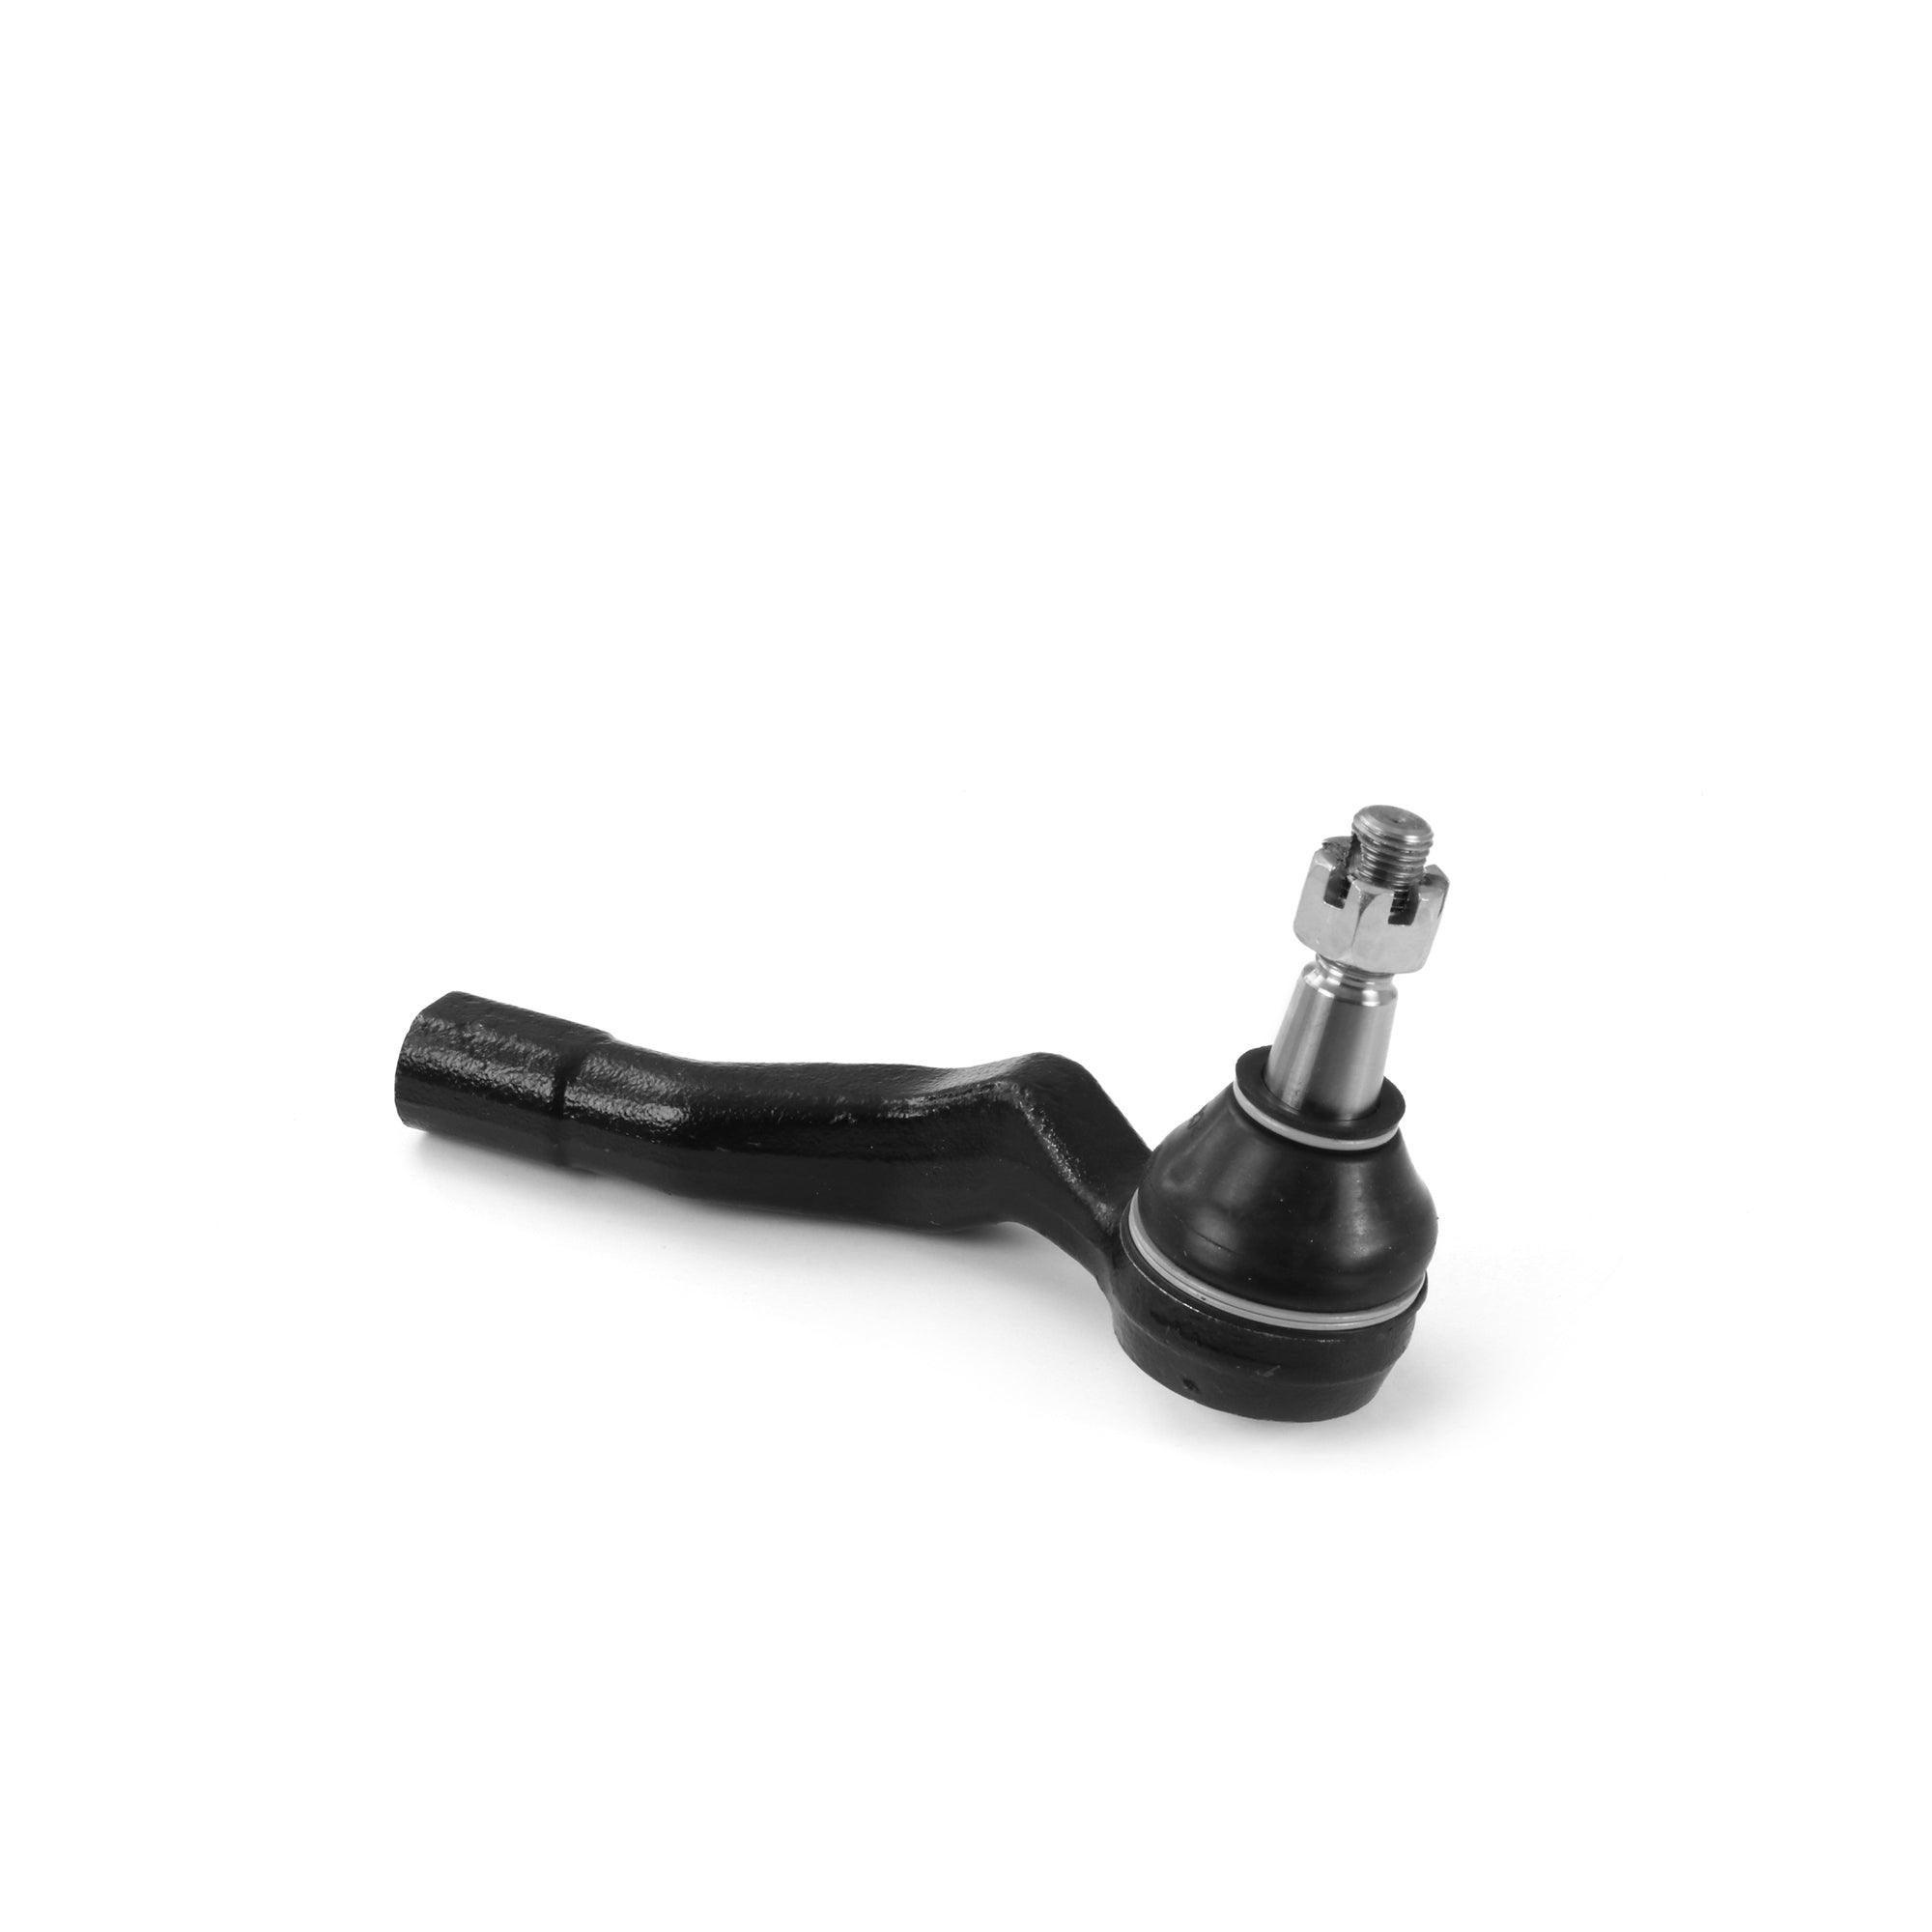 Right Outer Tie Rod End 47381MT - Metrix Premium Chassis Parts